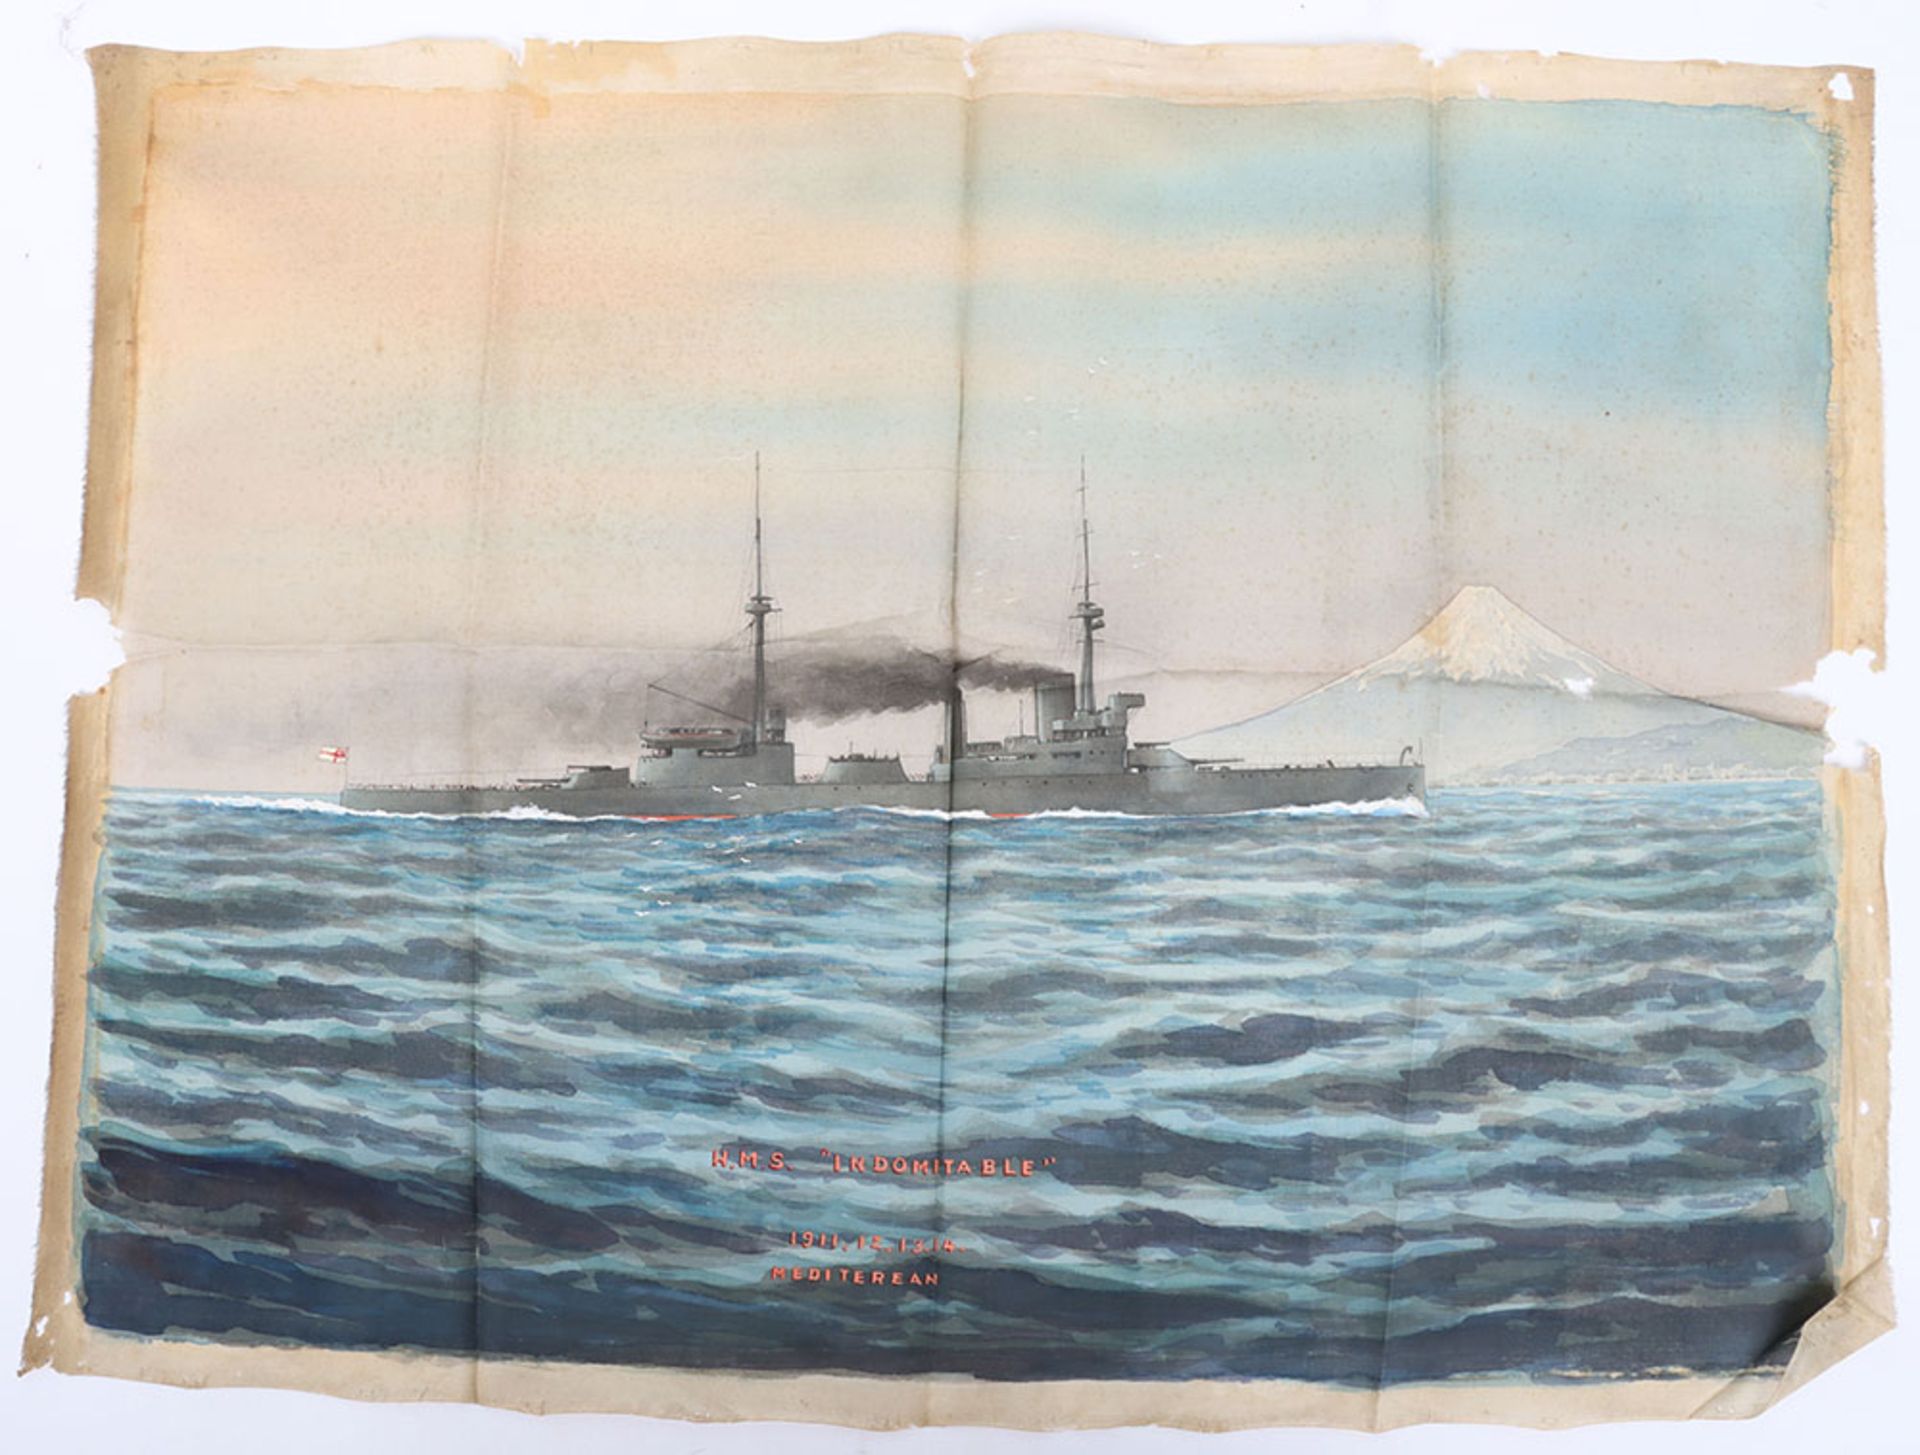 Painting of H.M.S. Indomitable